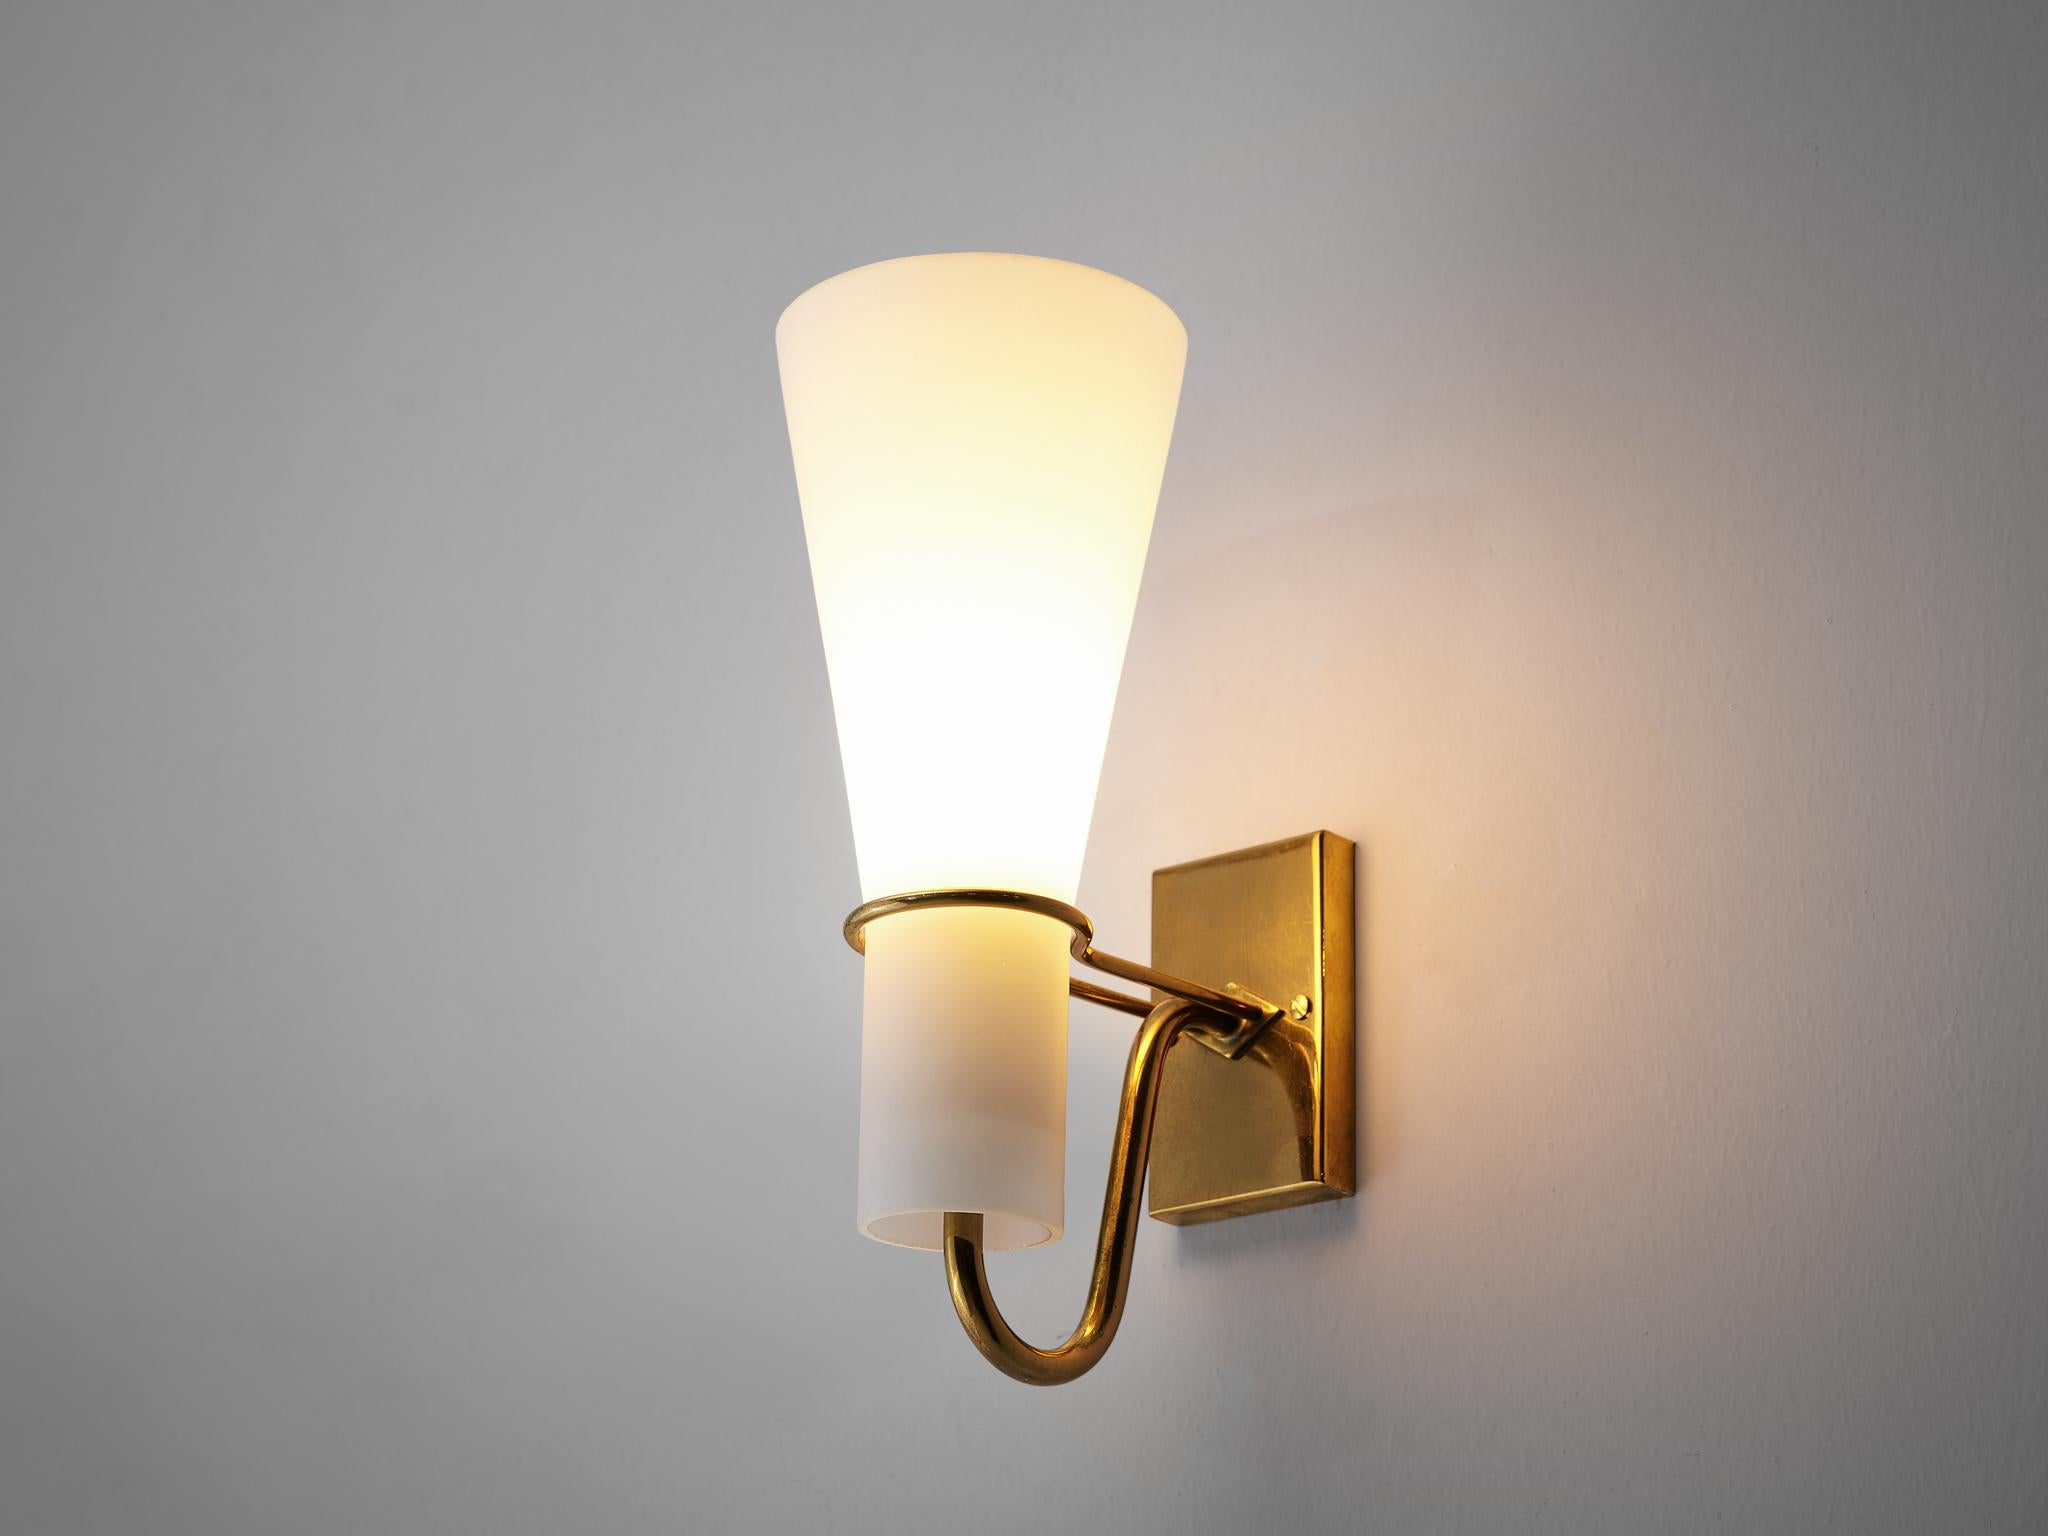 Hans Bergström for ASEA Belysning, wall light, brass, matted glass, Sweden, 1950s

This cone shaped wall light is held by filigree brass details ending in a small rectangular plate. Due to the matted glass the light gets smooth and cozy. The